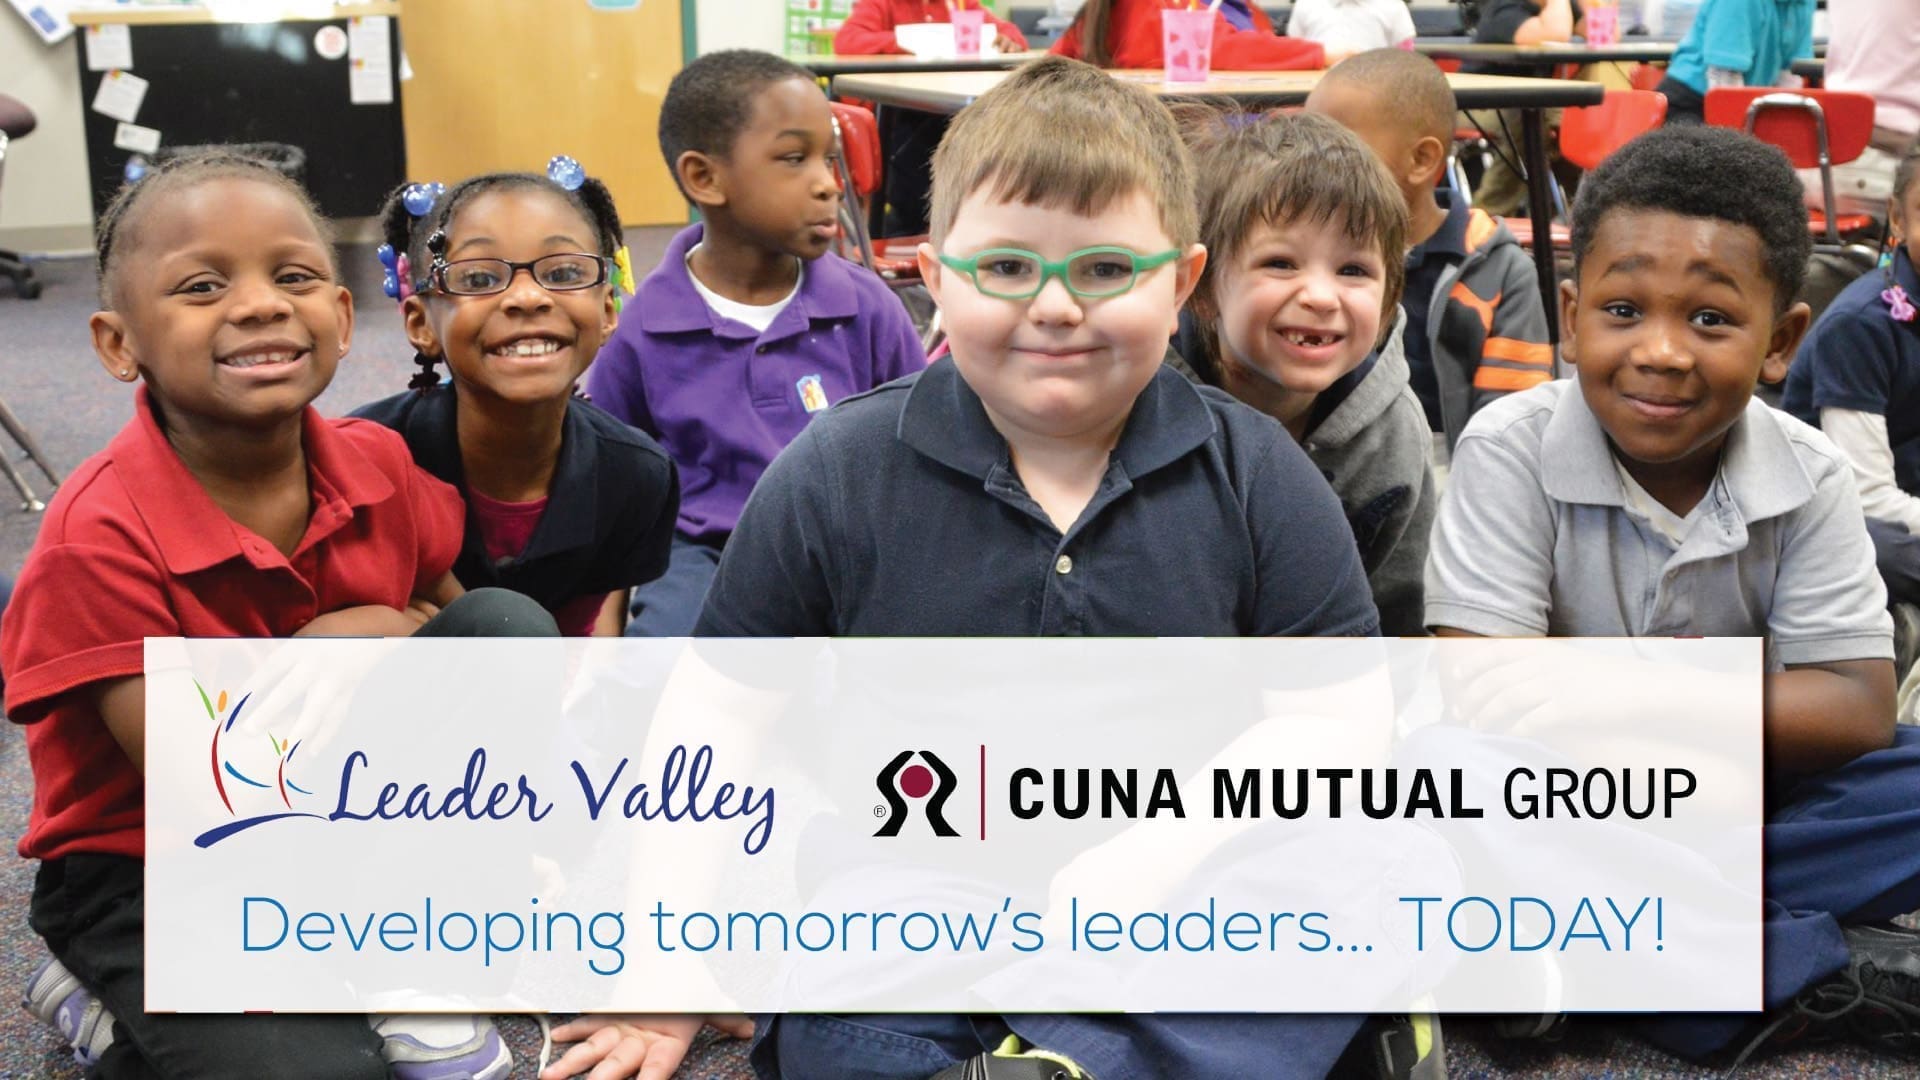 Leader Valley Awarded $200,000 Grant From CUNA Mutual Group Foundation